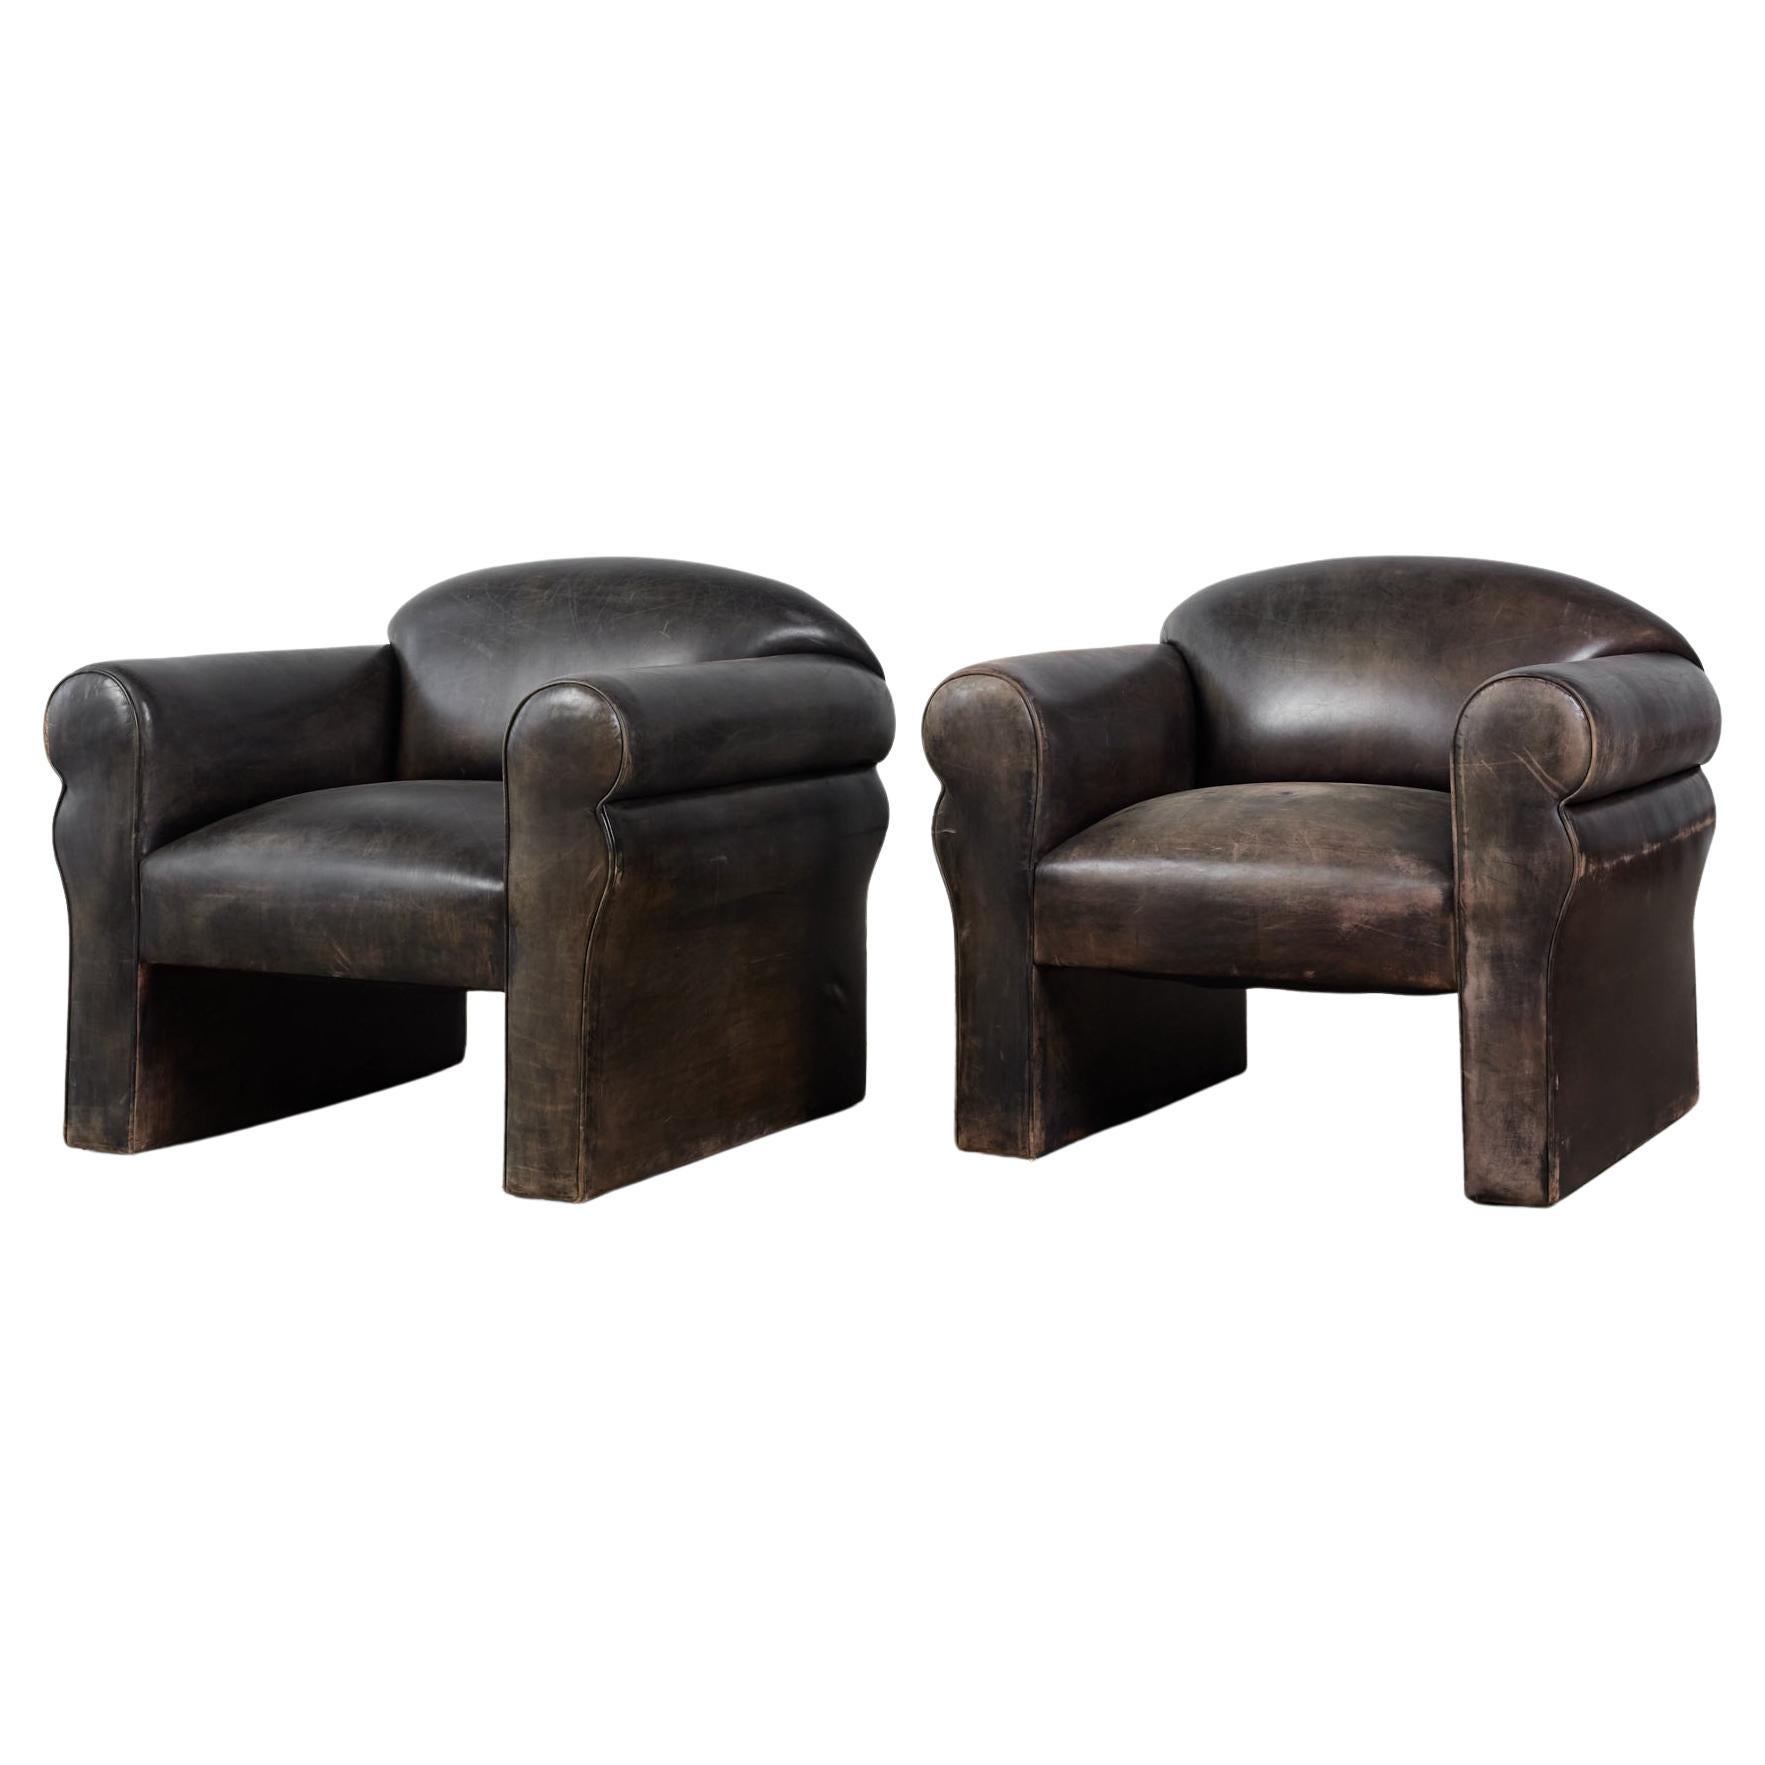 Pair of Patinated Black Leather Lounge Chairs